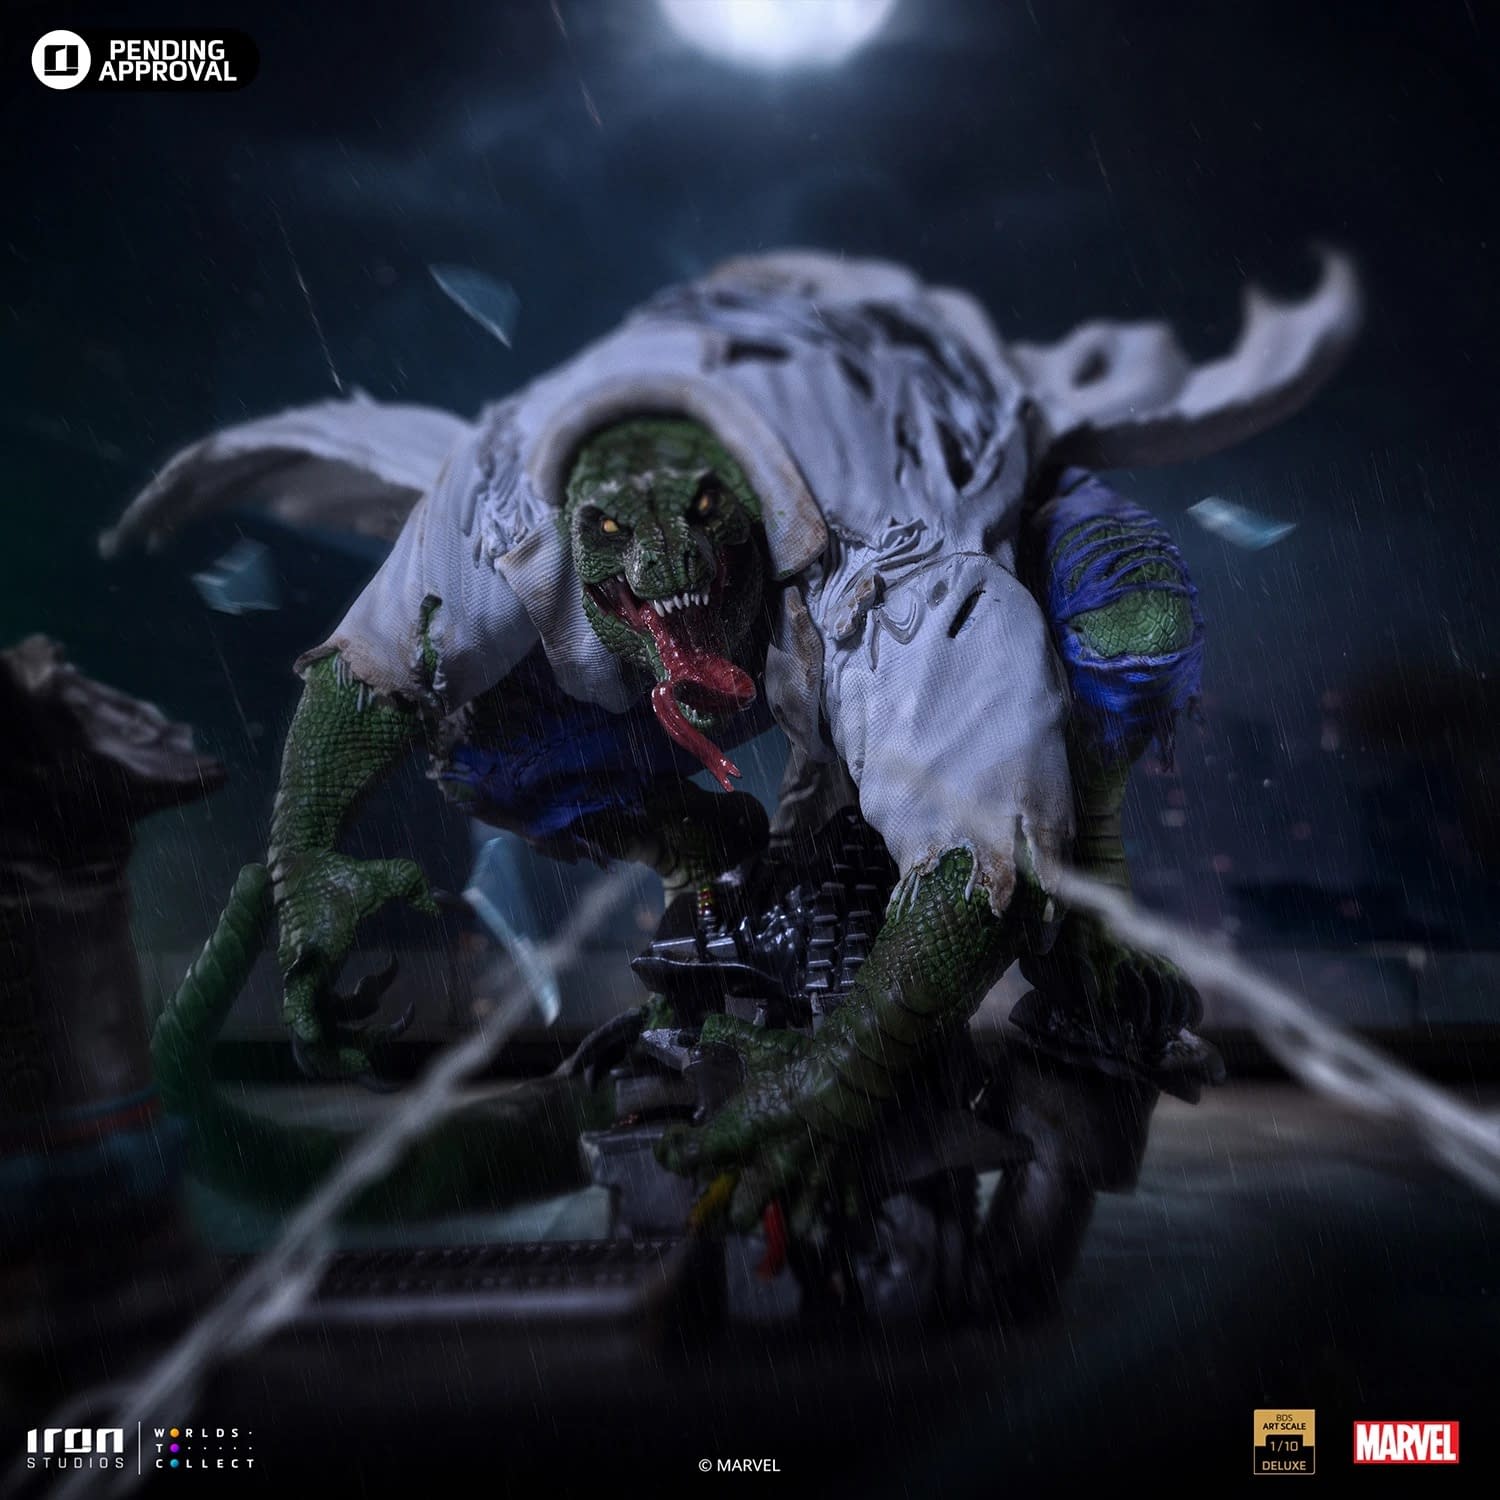 Spider-Man vs. Villains The Lizard Diorama Revealed by Iron Studios0